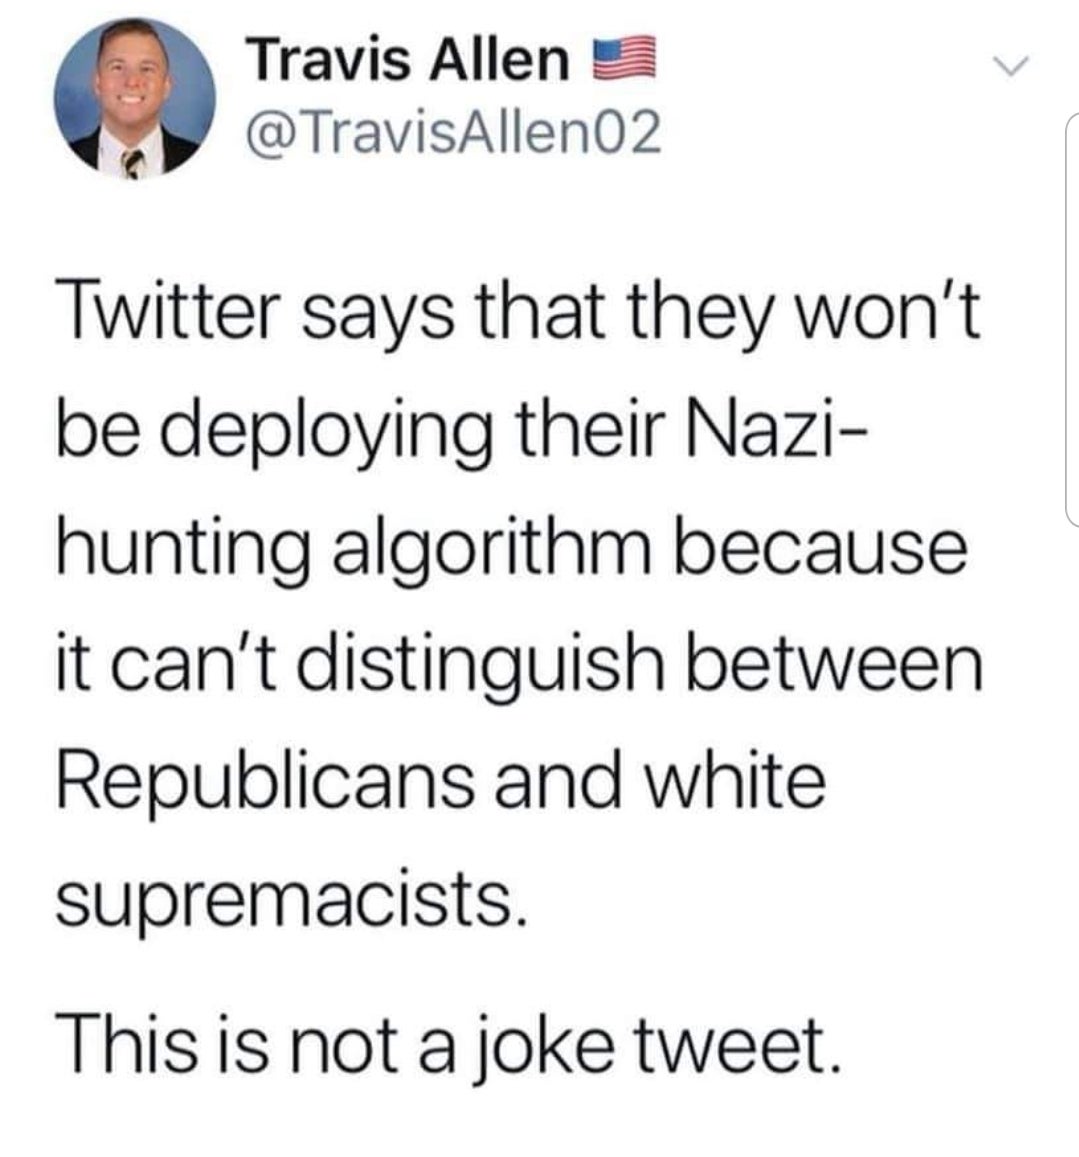 ninja on ellen meme - Travis Allen Twitter says that they won't be deploying their Nazi hunting algorithm because it can't distinguish between Republicans and white supremacists. This is not a joke tweet.